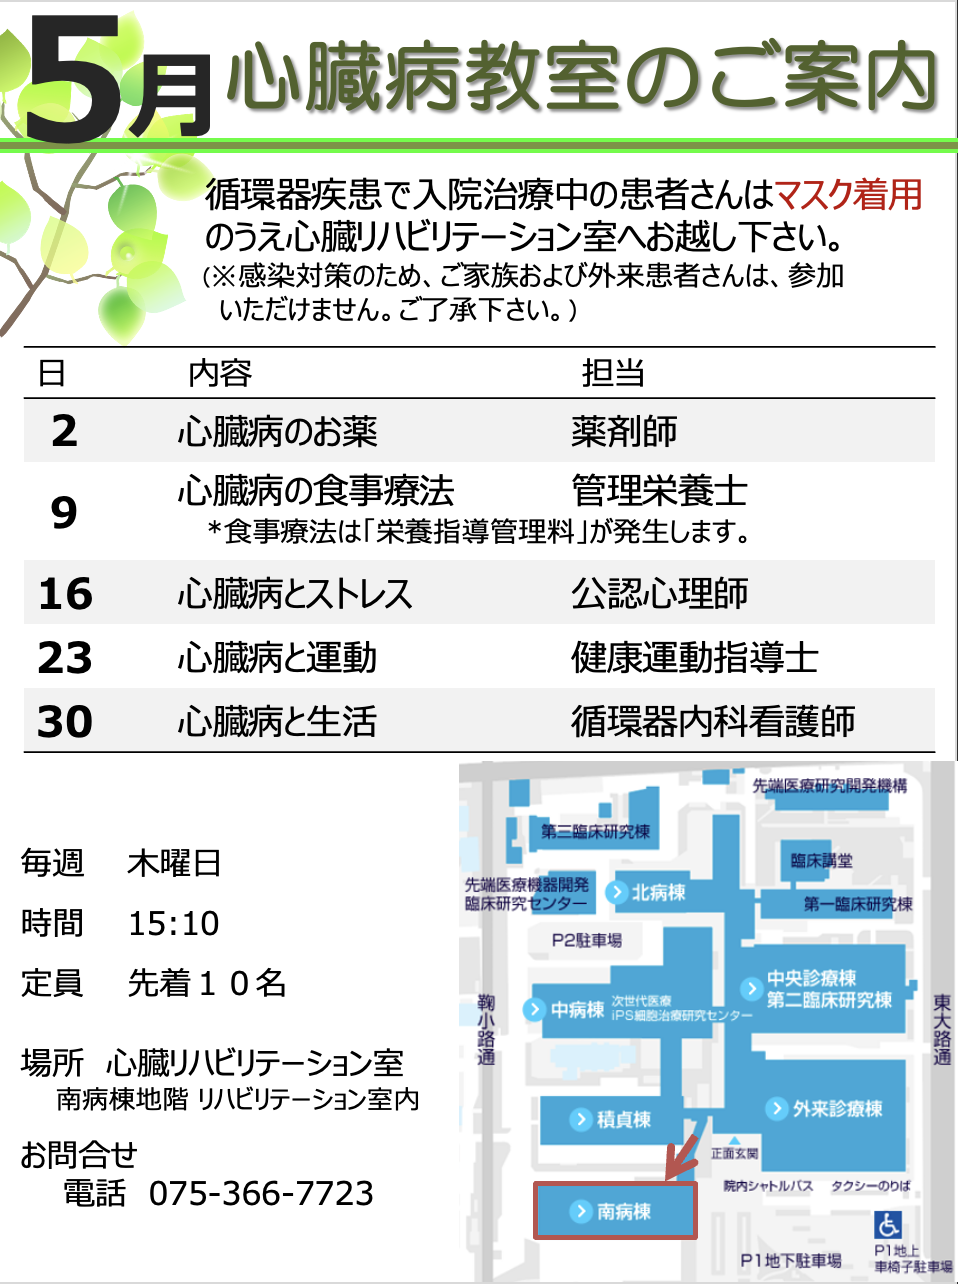 http://kyoto-u-cardio.jp/shinryo/5ec5b58276345c8e4f7da5c68efa594056c57205.png